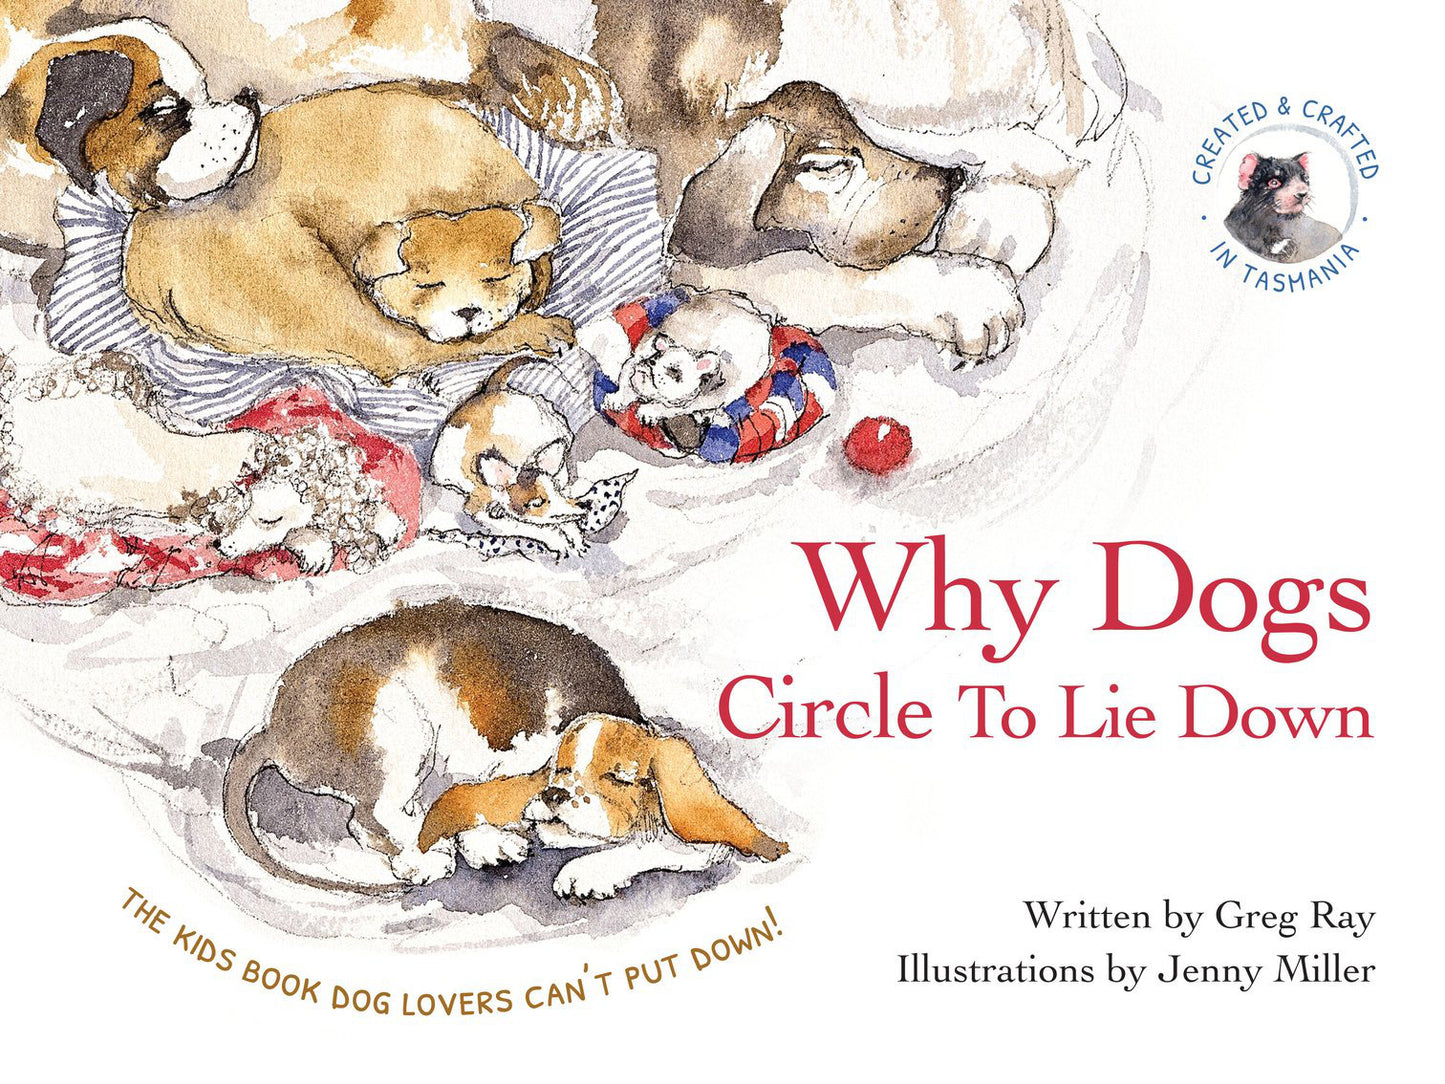 Book - Why Dogs Circle to Lie Down